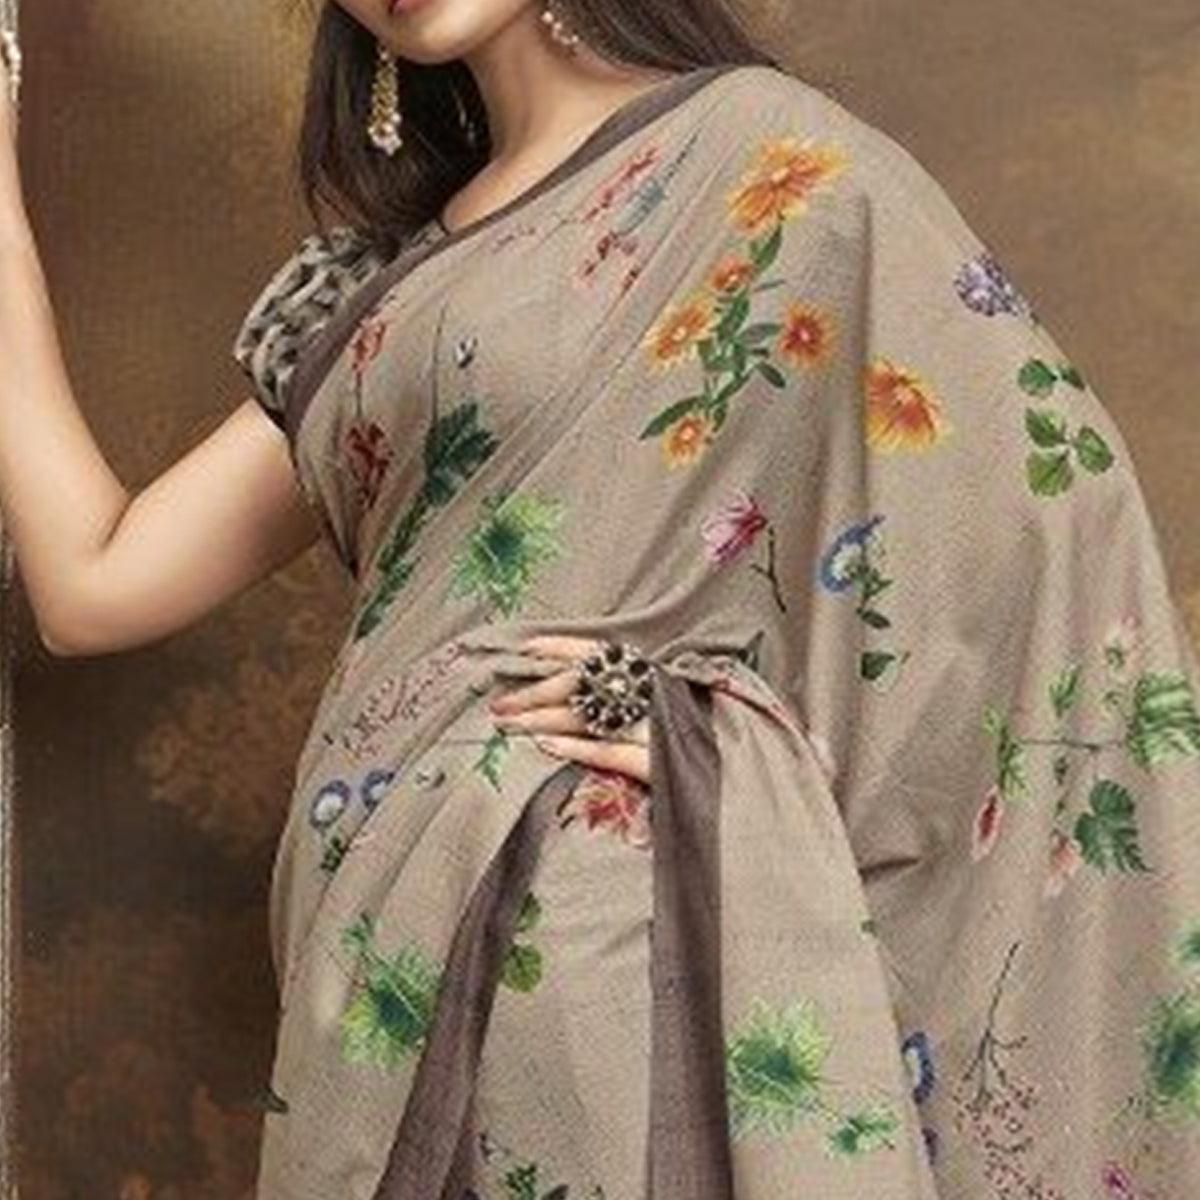 Sareemall Beige Casual Satin Printed Saree With Unstitched Blouse - Peachmode